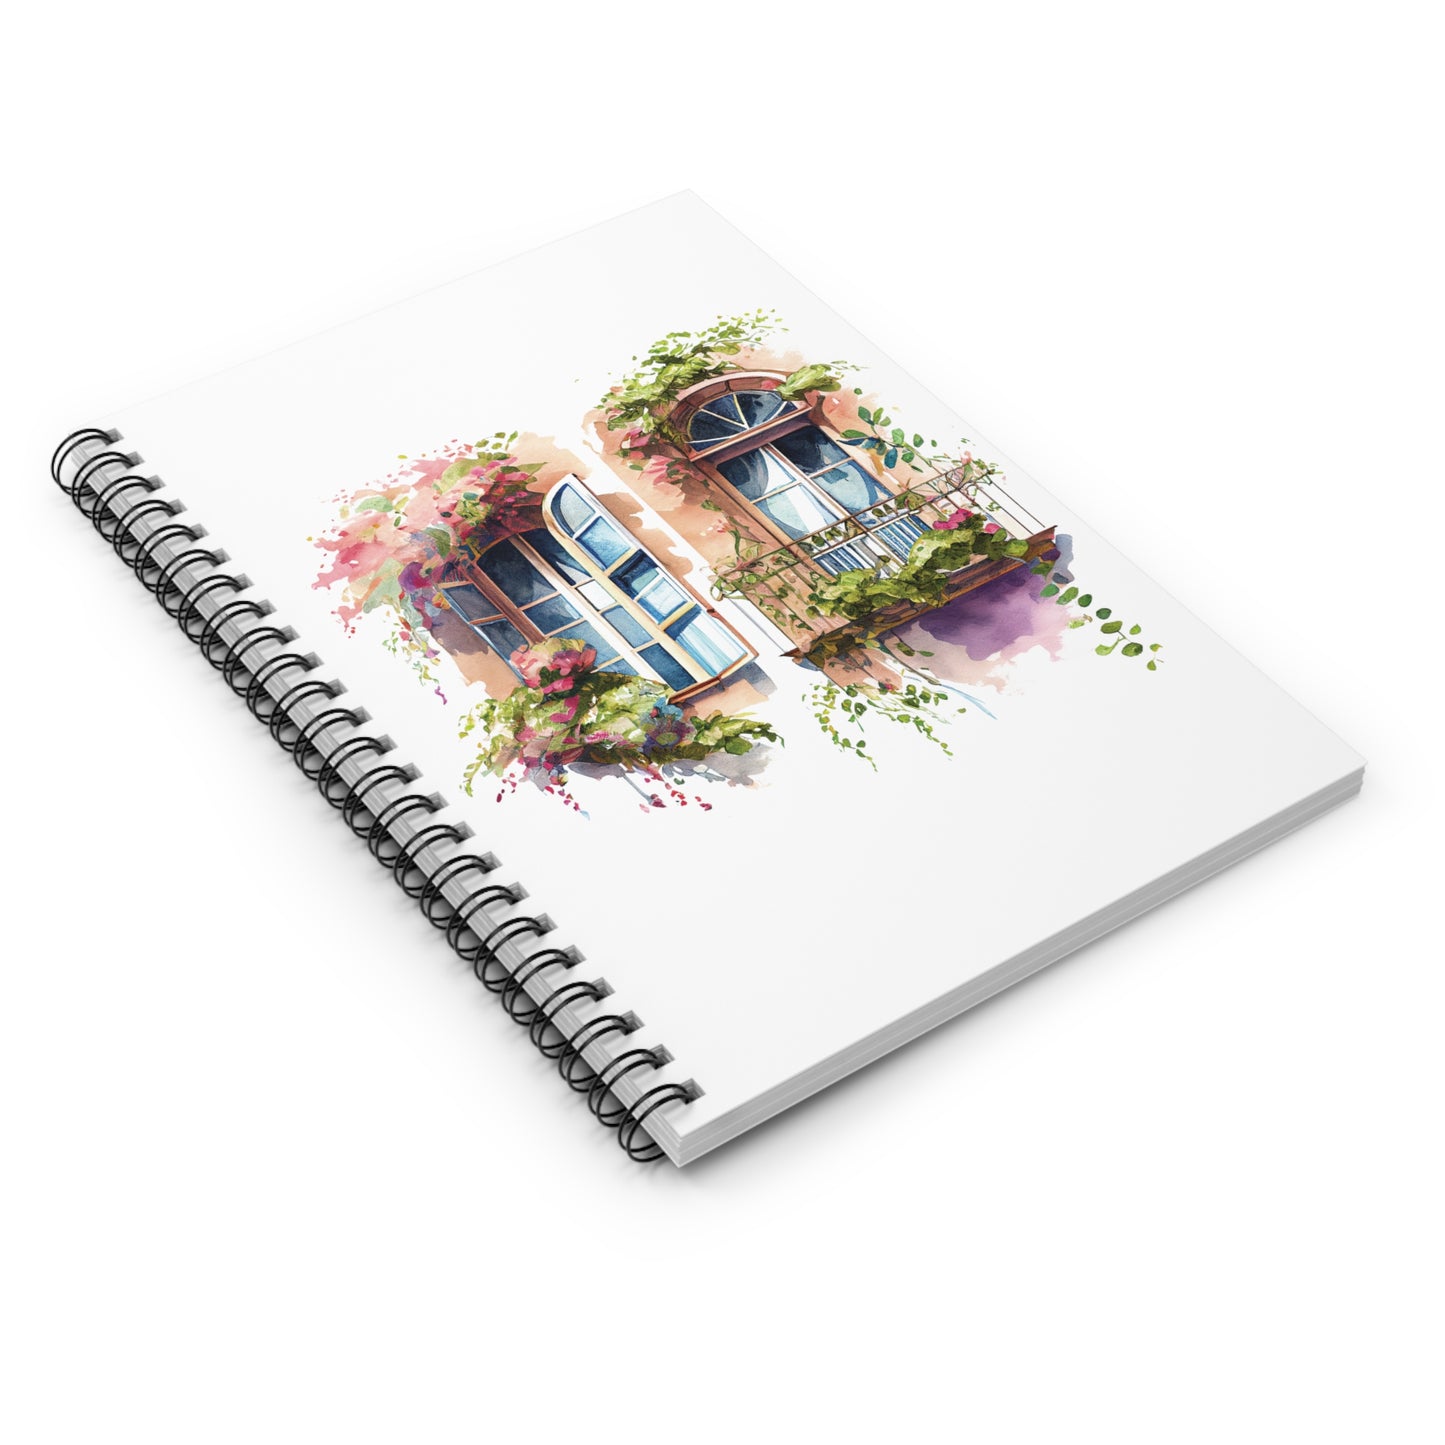 Balcony Flowers: Spiral Notebook - Log Books - Journals - Diaries - and More Custom Printed by TheGlassyLass